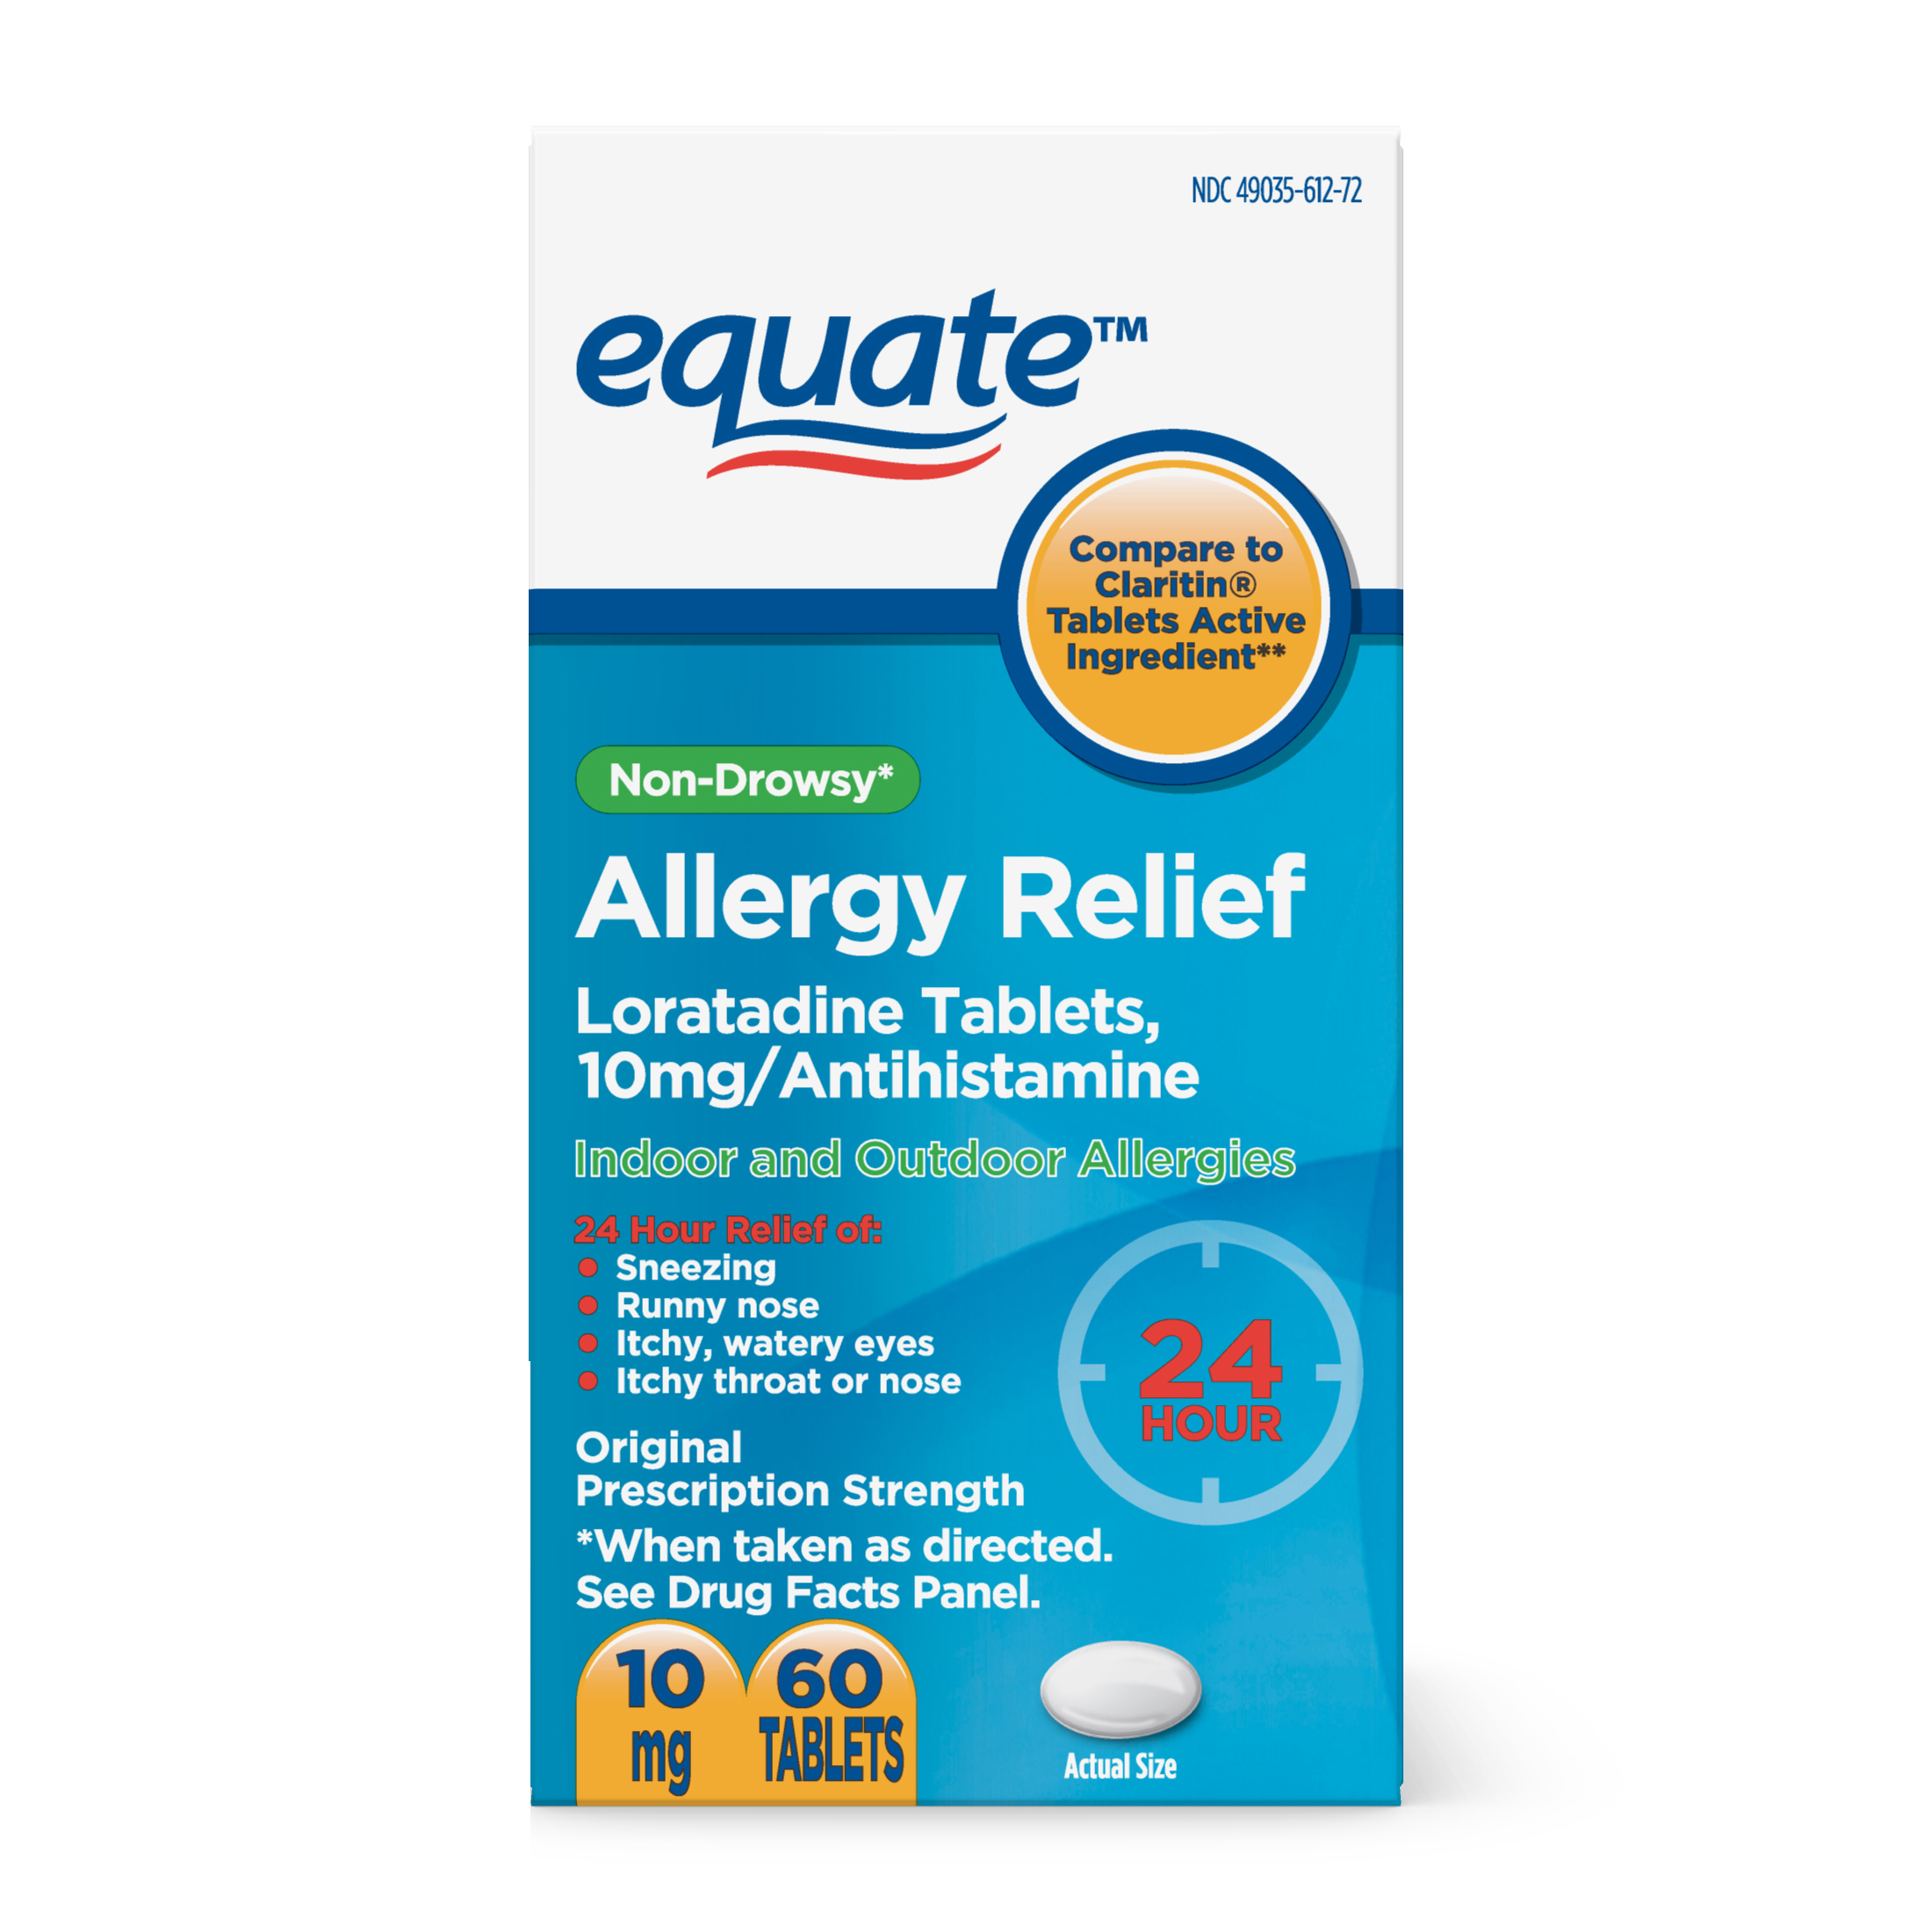 Equate Allergy Relief Loratadine Tablets 10 mg, Antihistamine, 60 Count - image 1 of 7